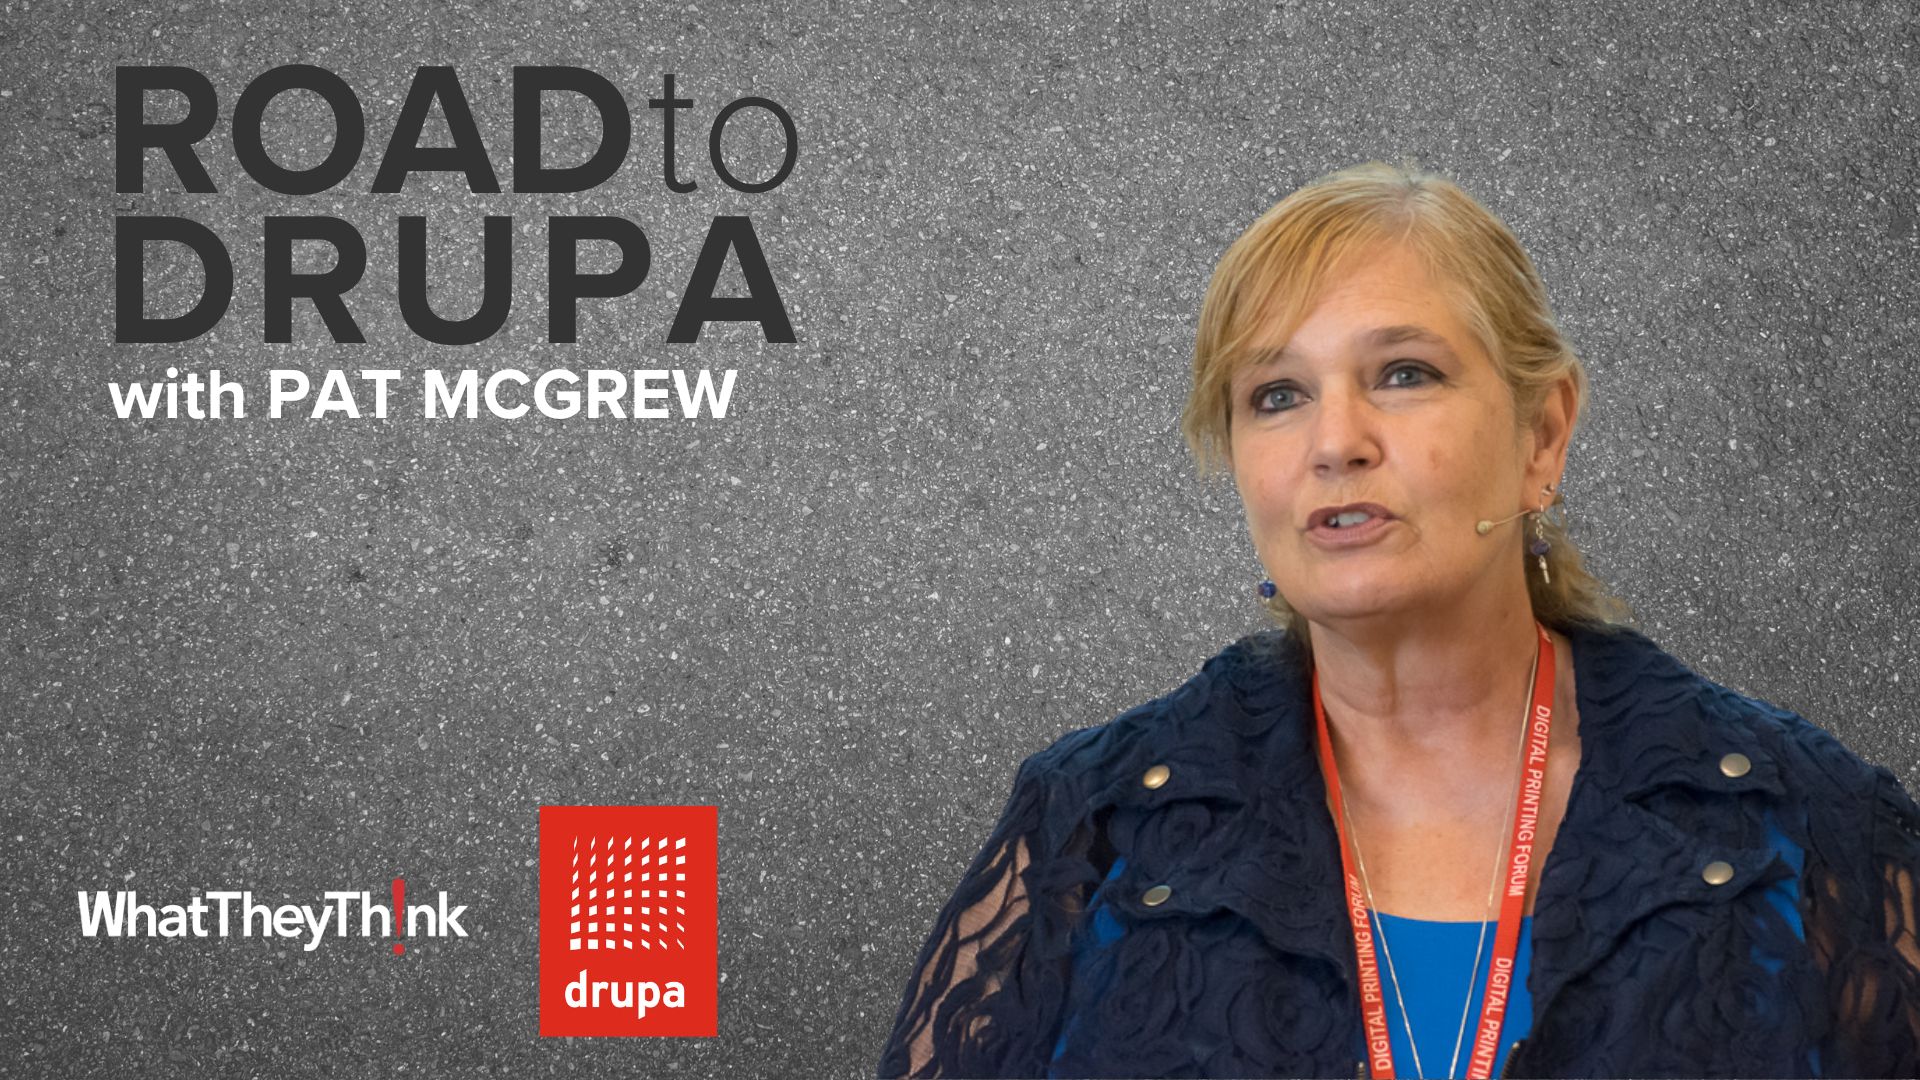 Video preview: The Road to drupa: Pat McGrew Identifies Automation as the Hot Topic